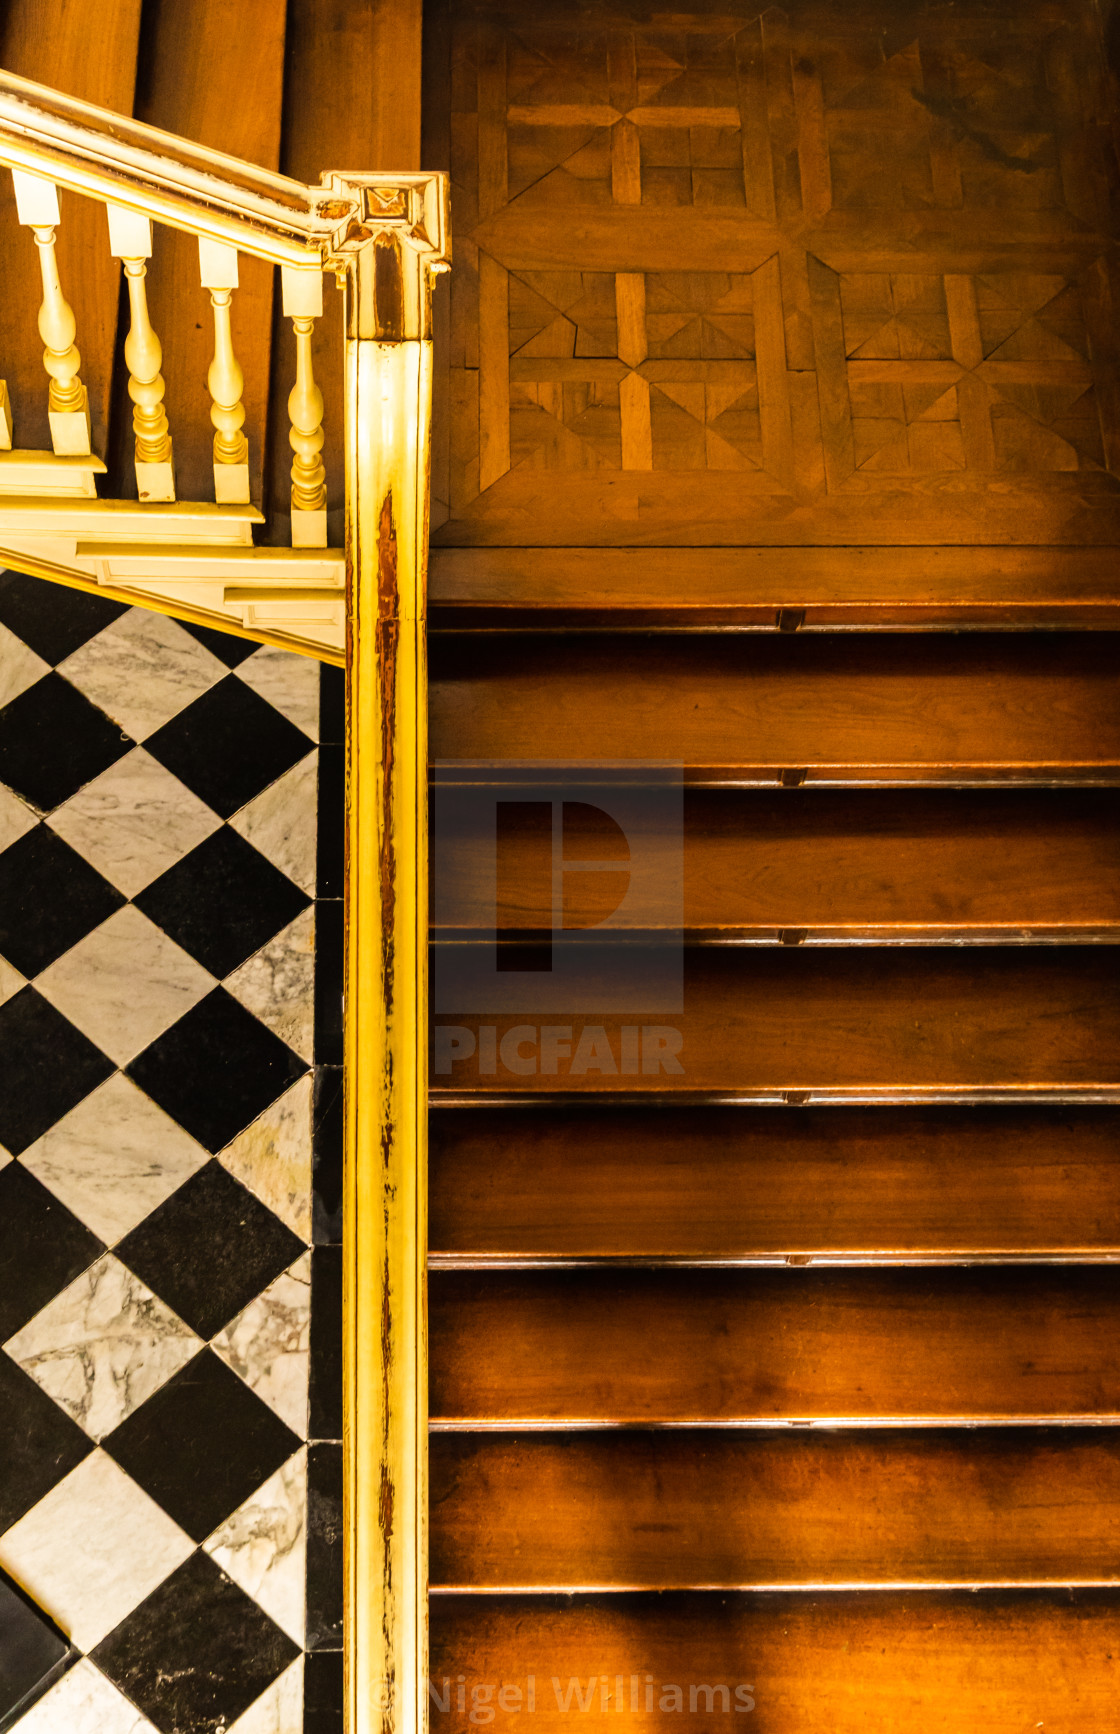 "Downstairs Abstract" stock image